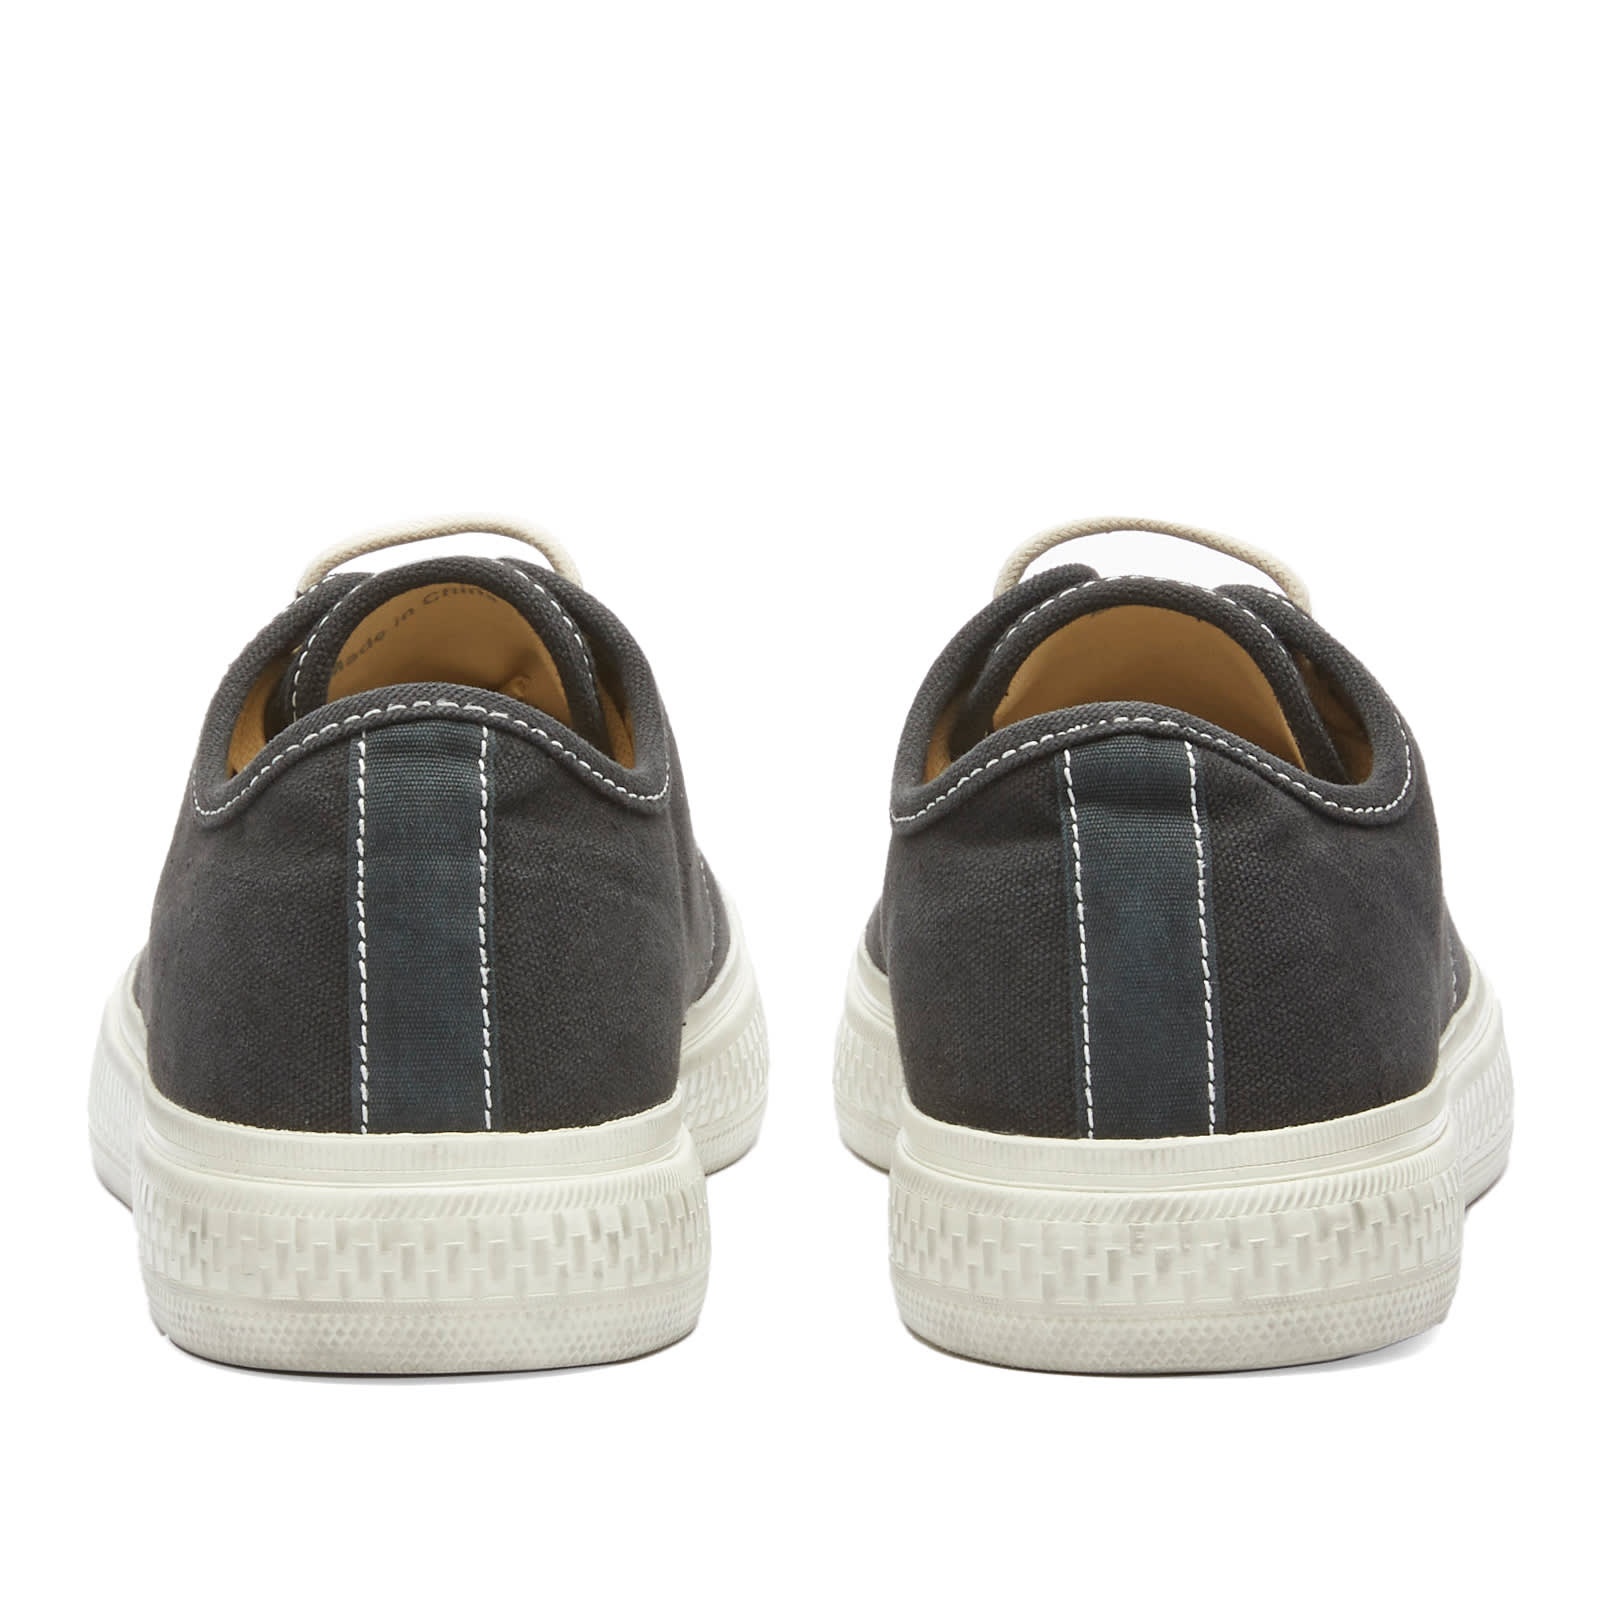 Acne Studios Ballow Soft Tumbled Tag Sneakers - 3